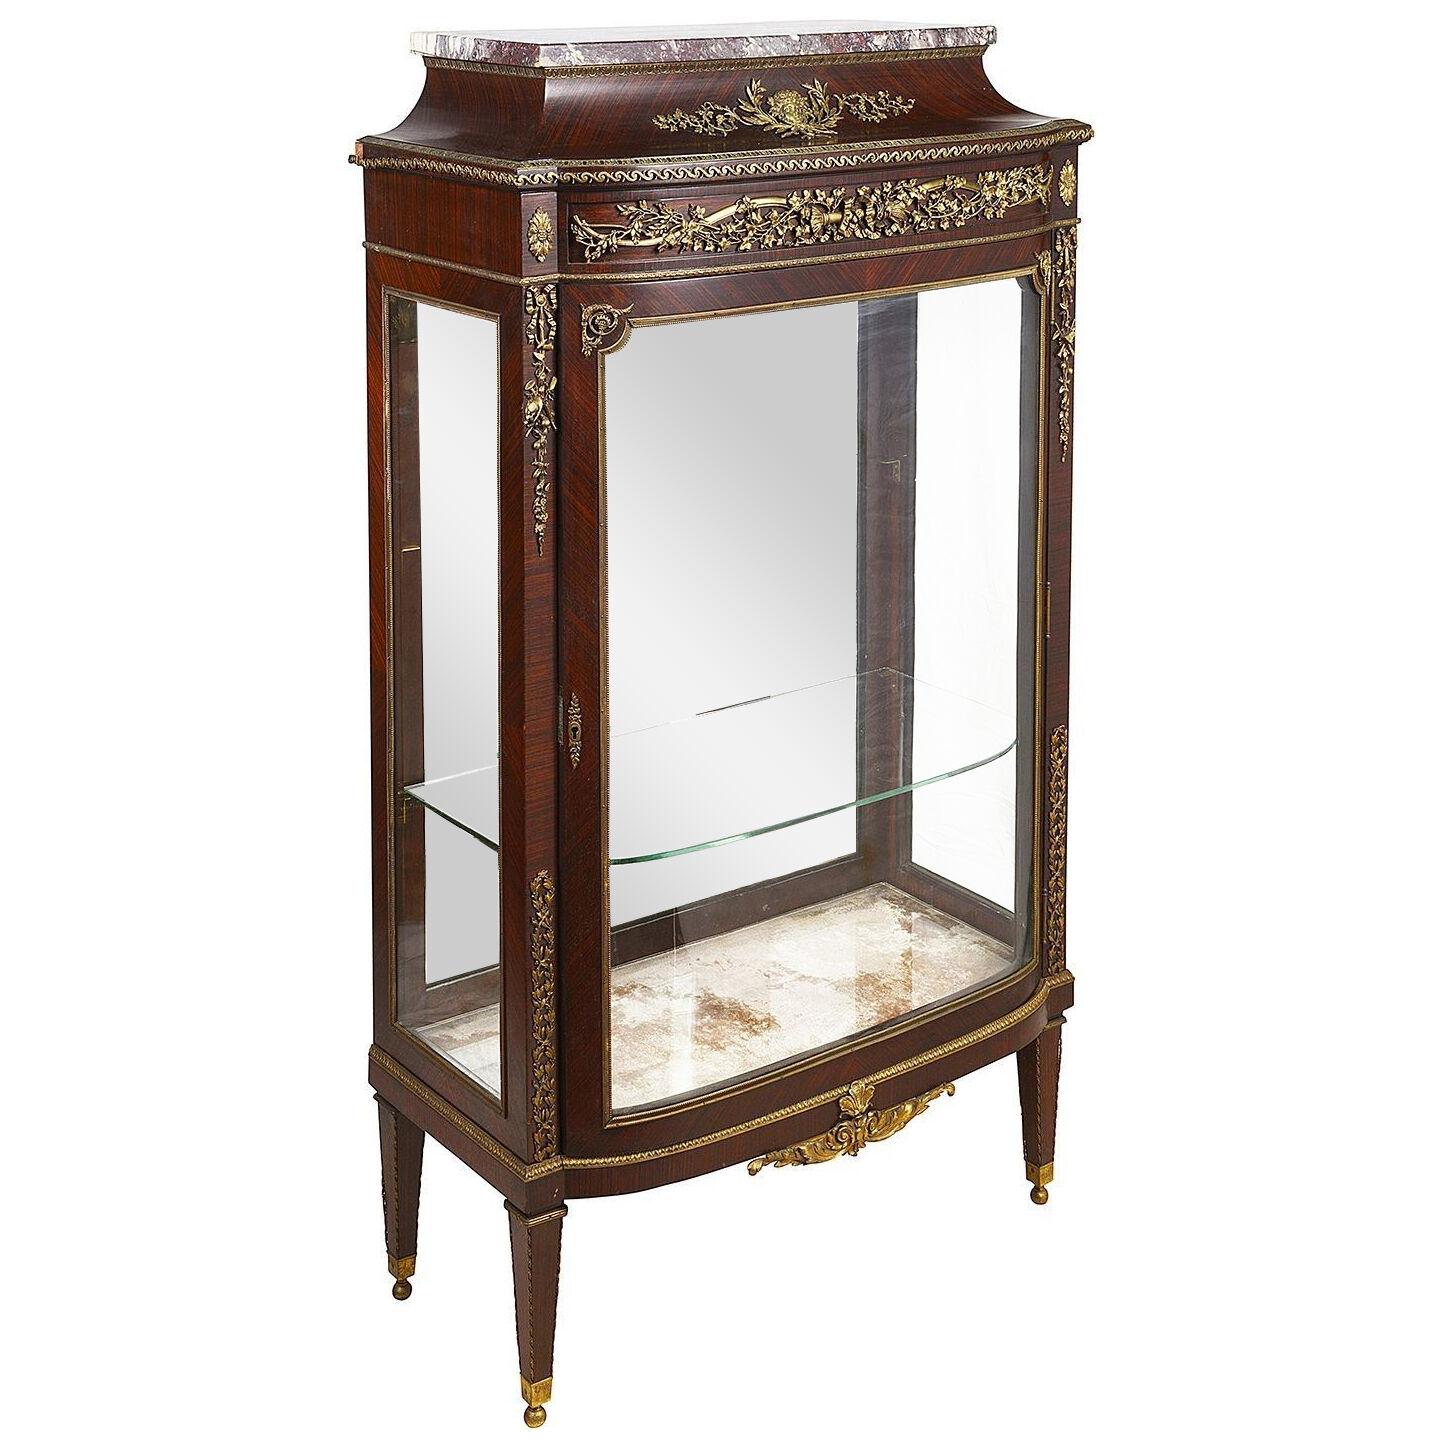 French Louis XVI style display cabinet, circa 1890